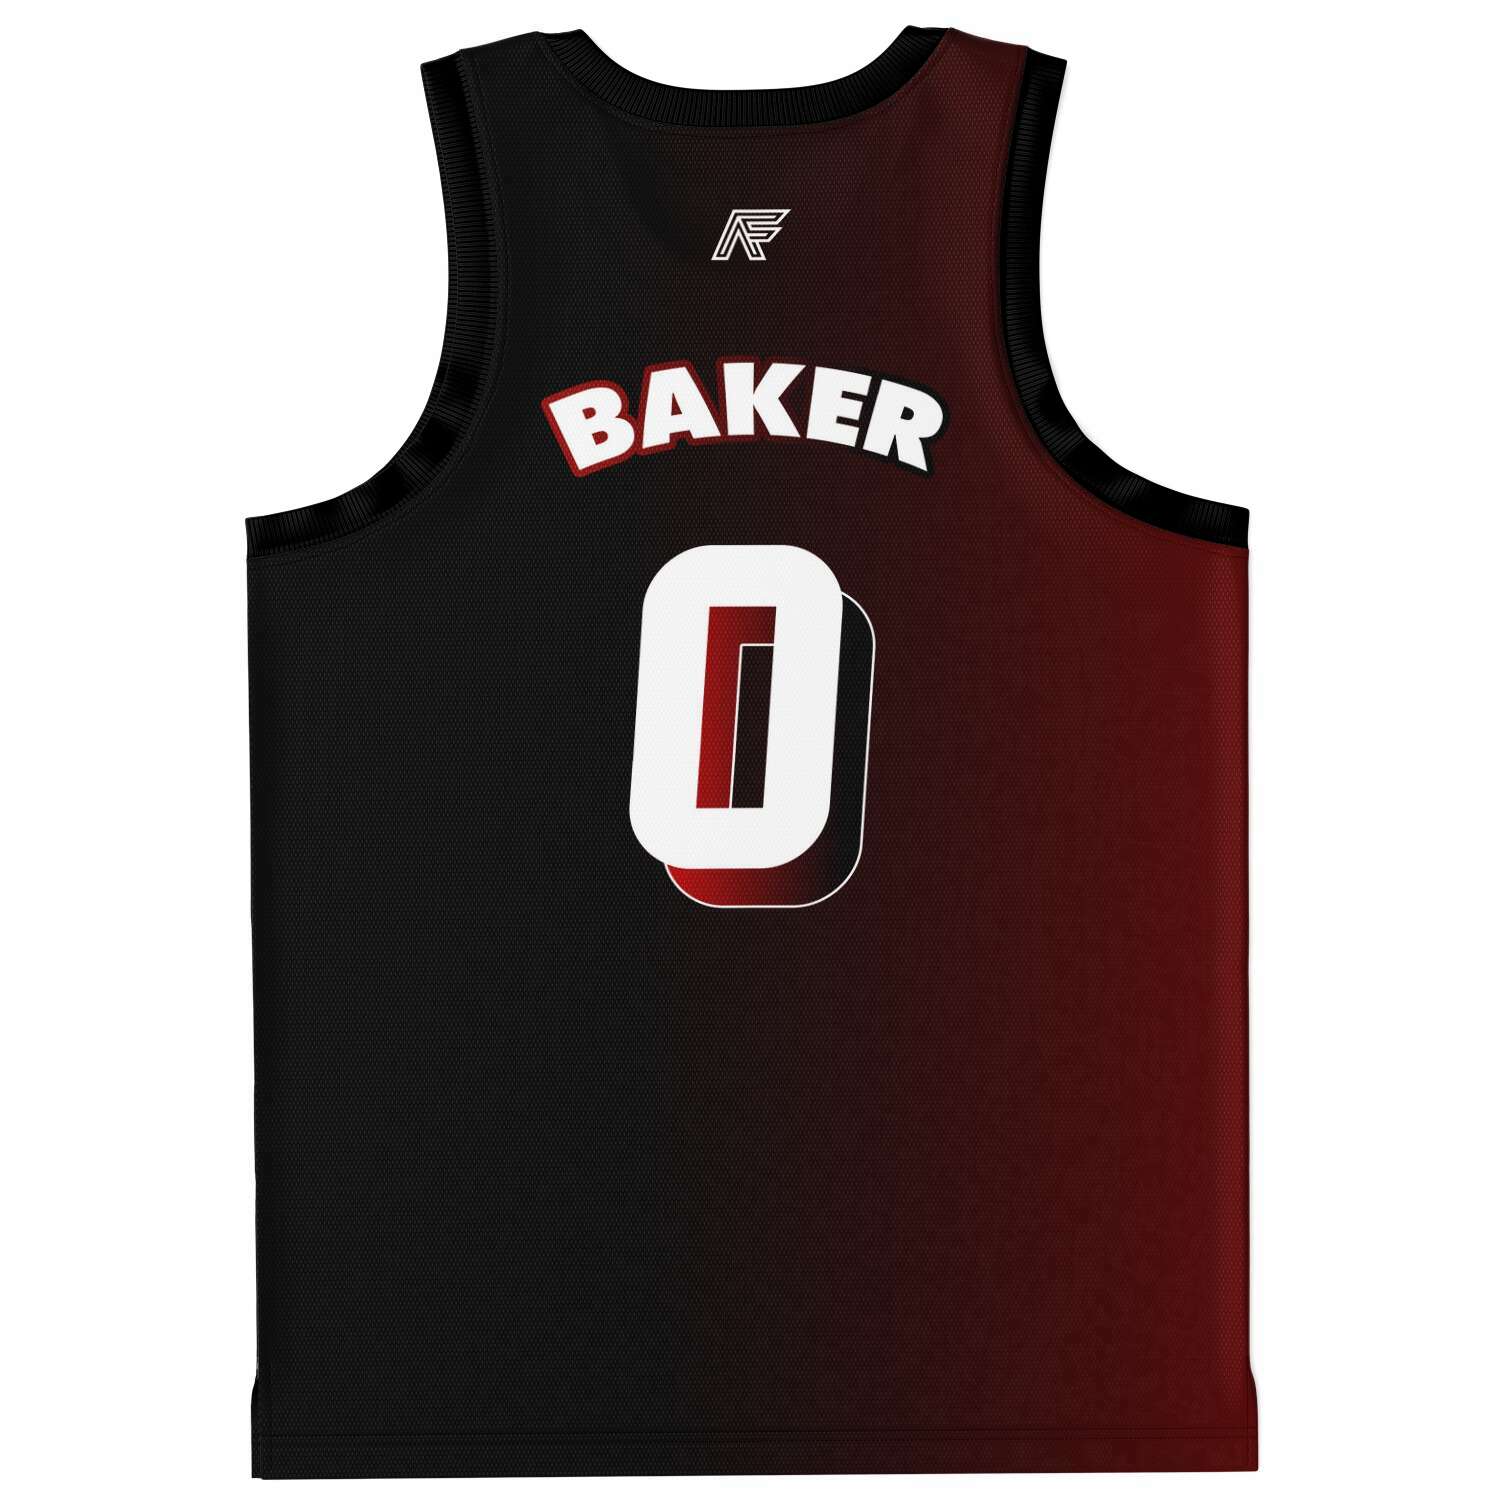 Big Shot Maker Jersey (Free Shipping Included)